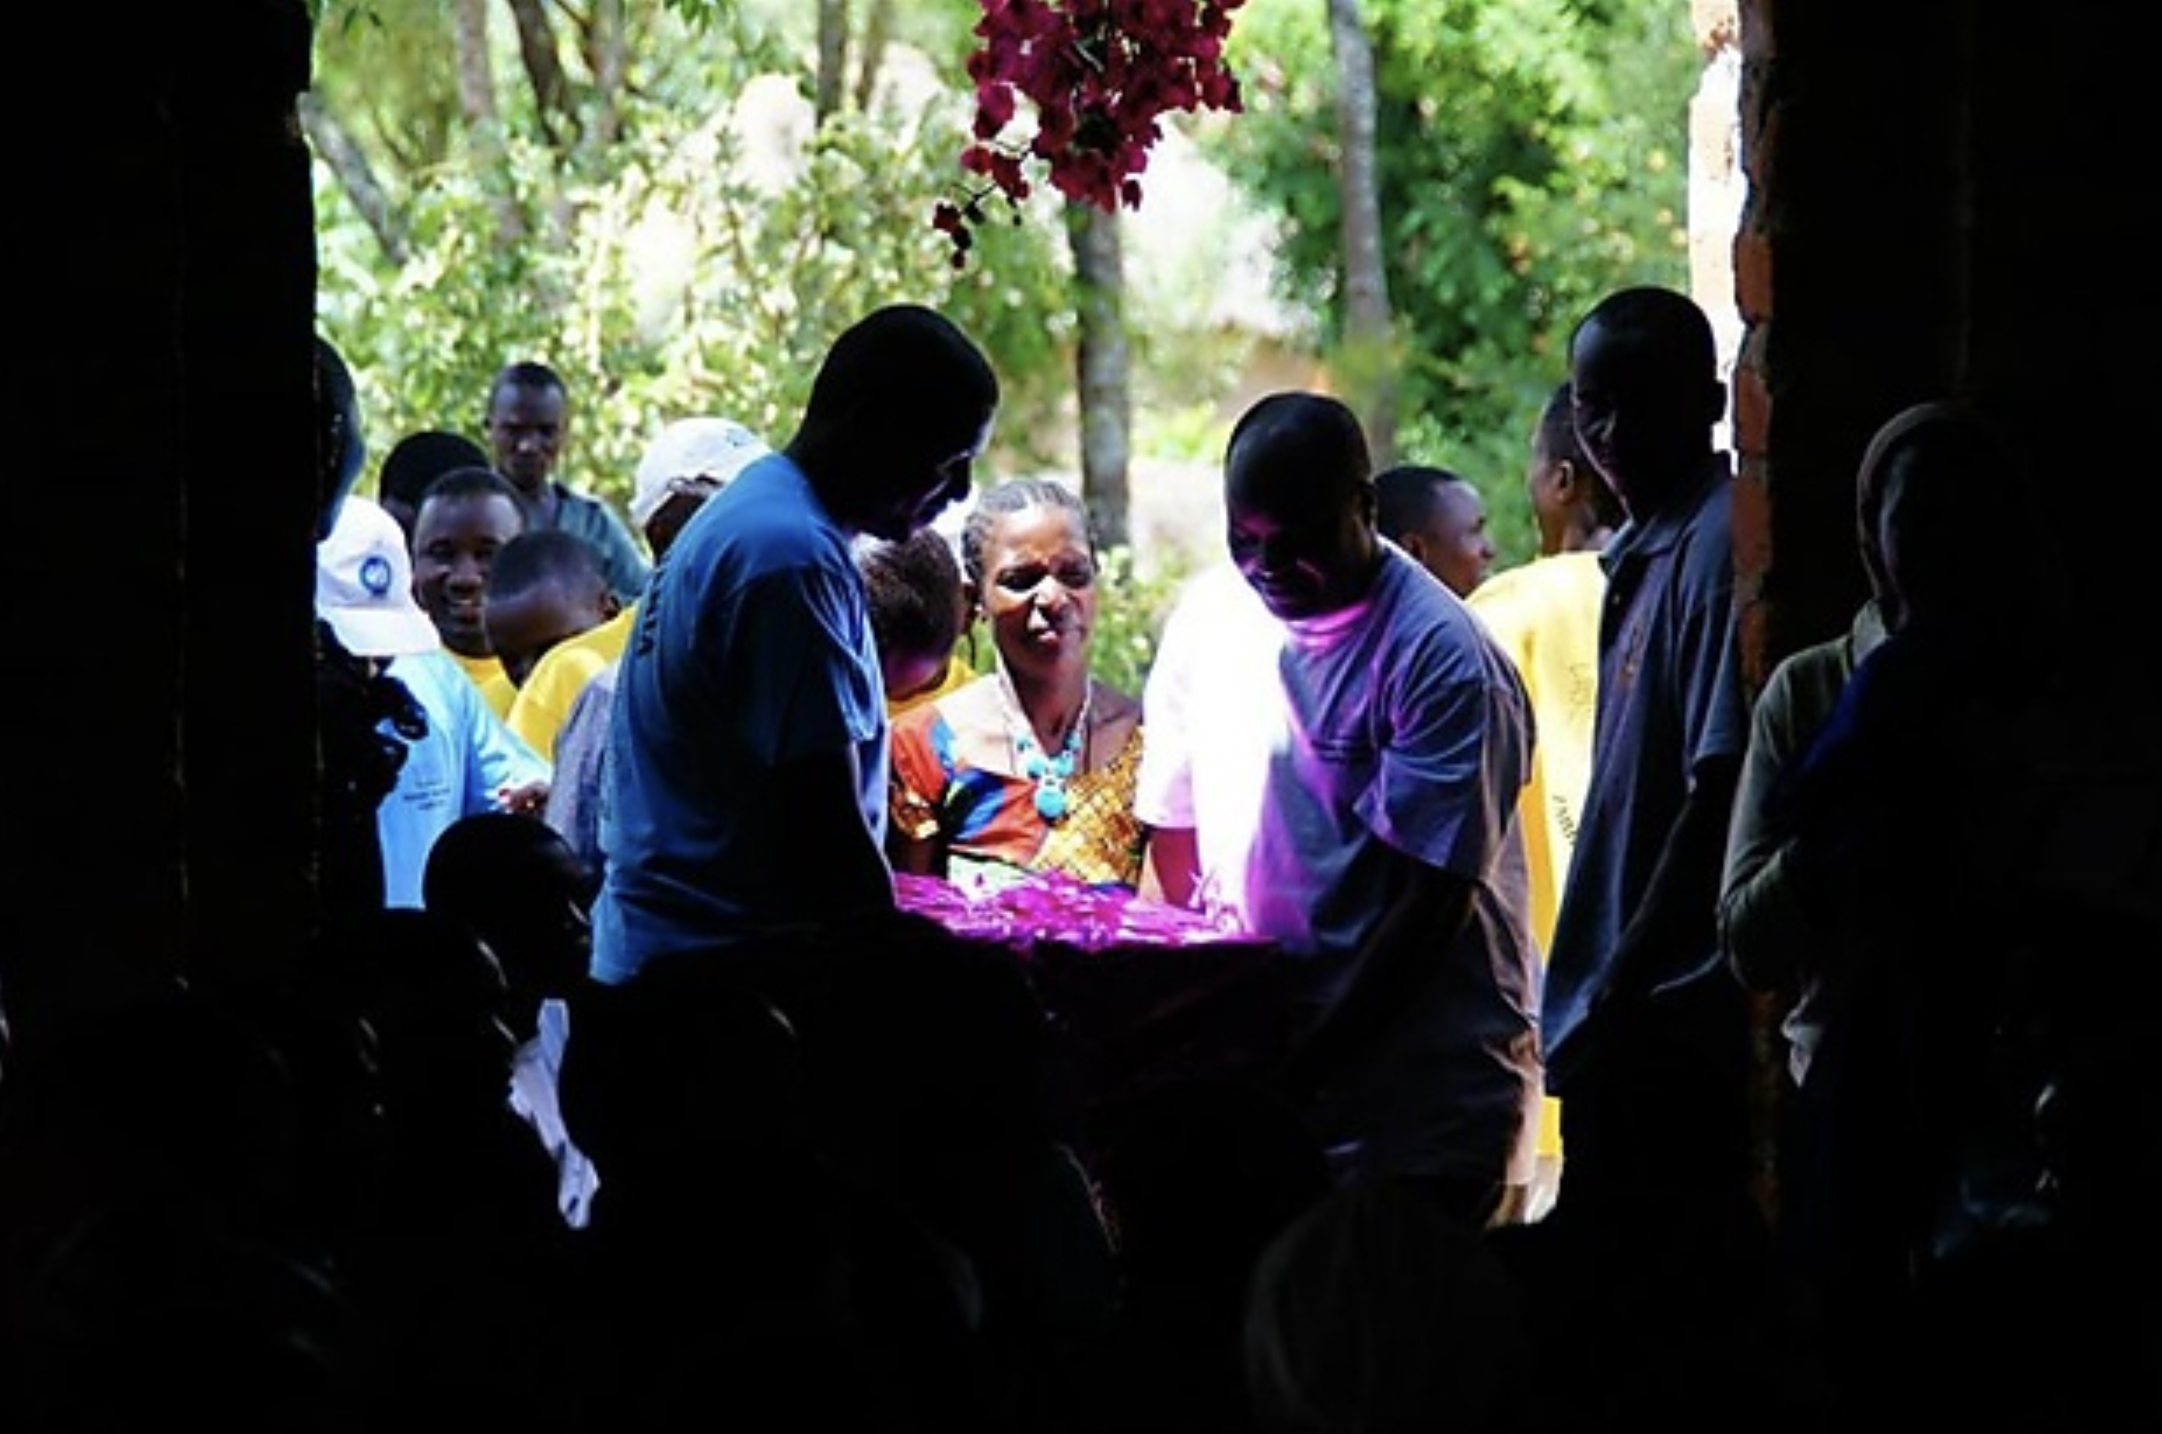 Image of the book of Luke in Ikoma arrives at its launch event in 2011